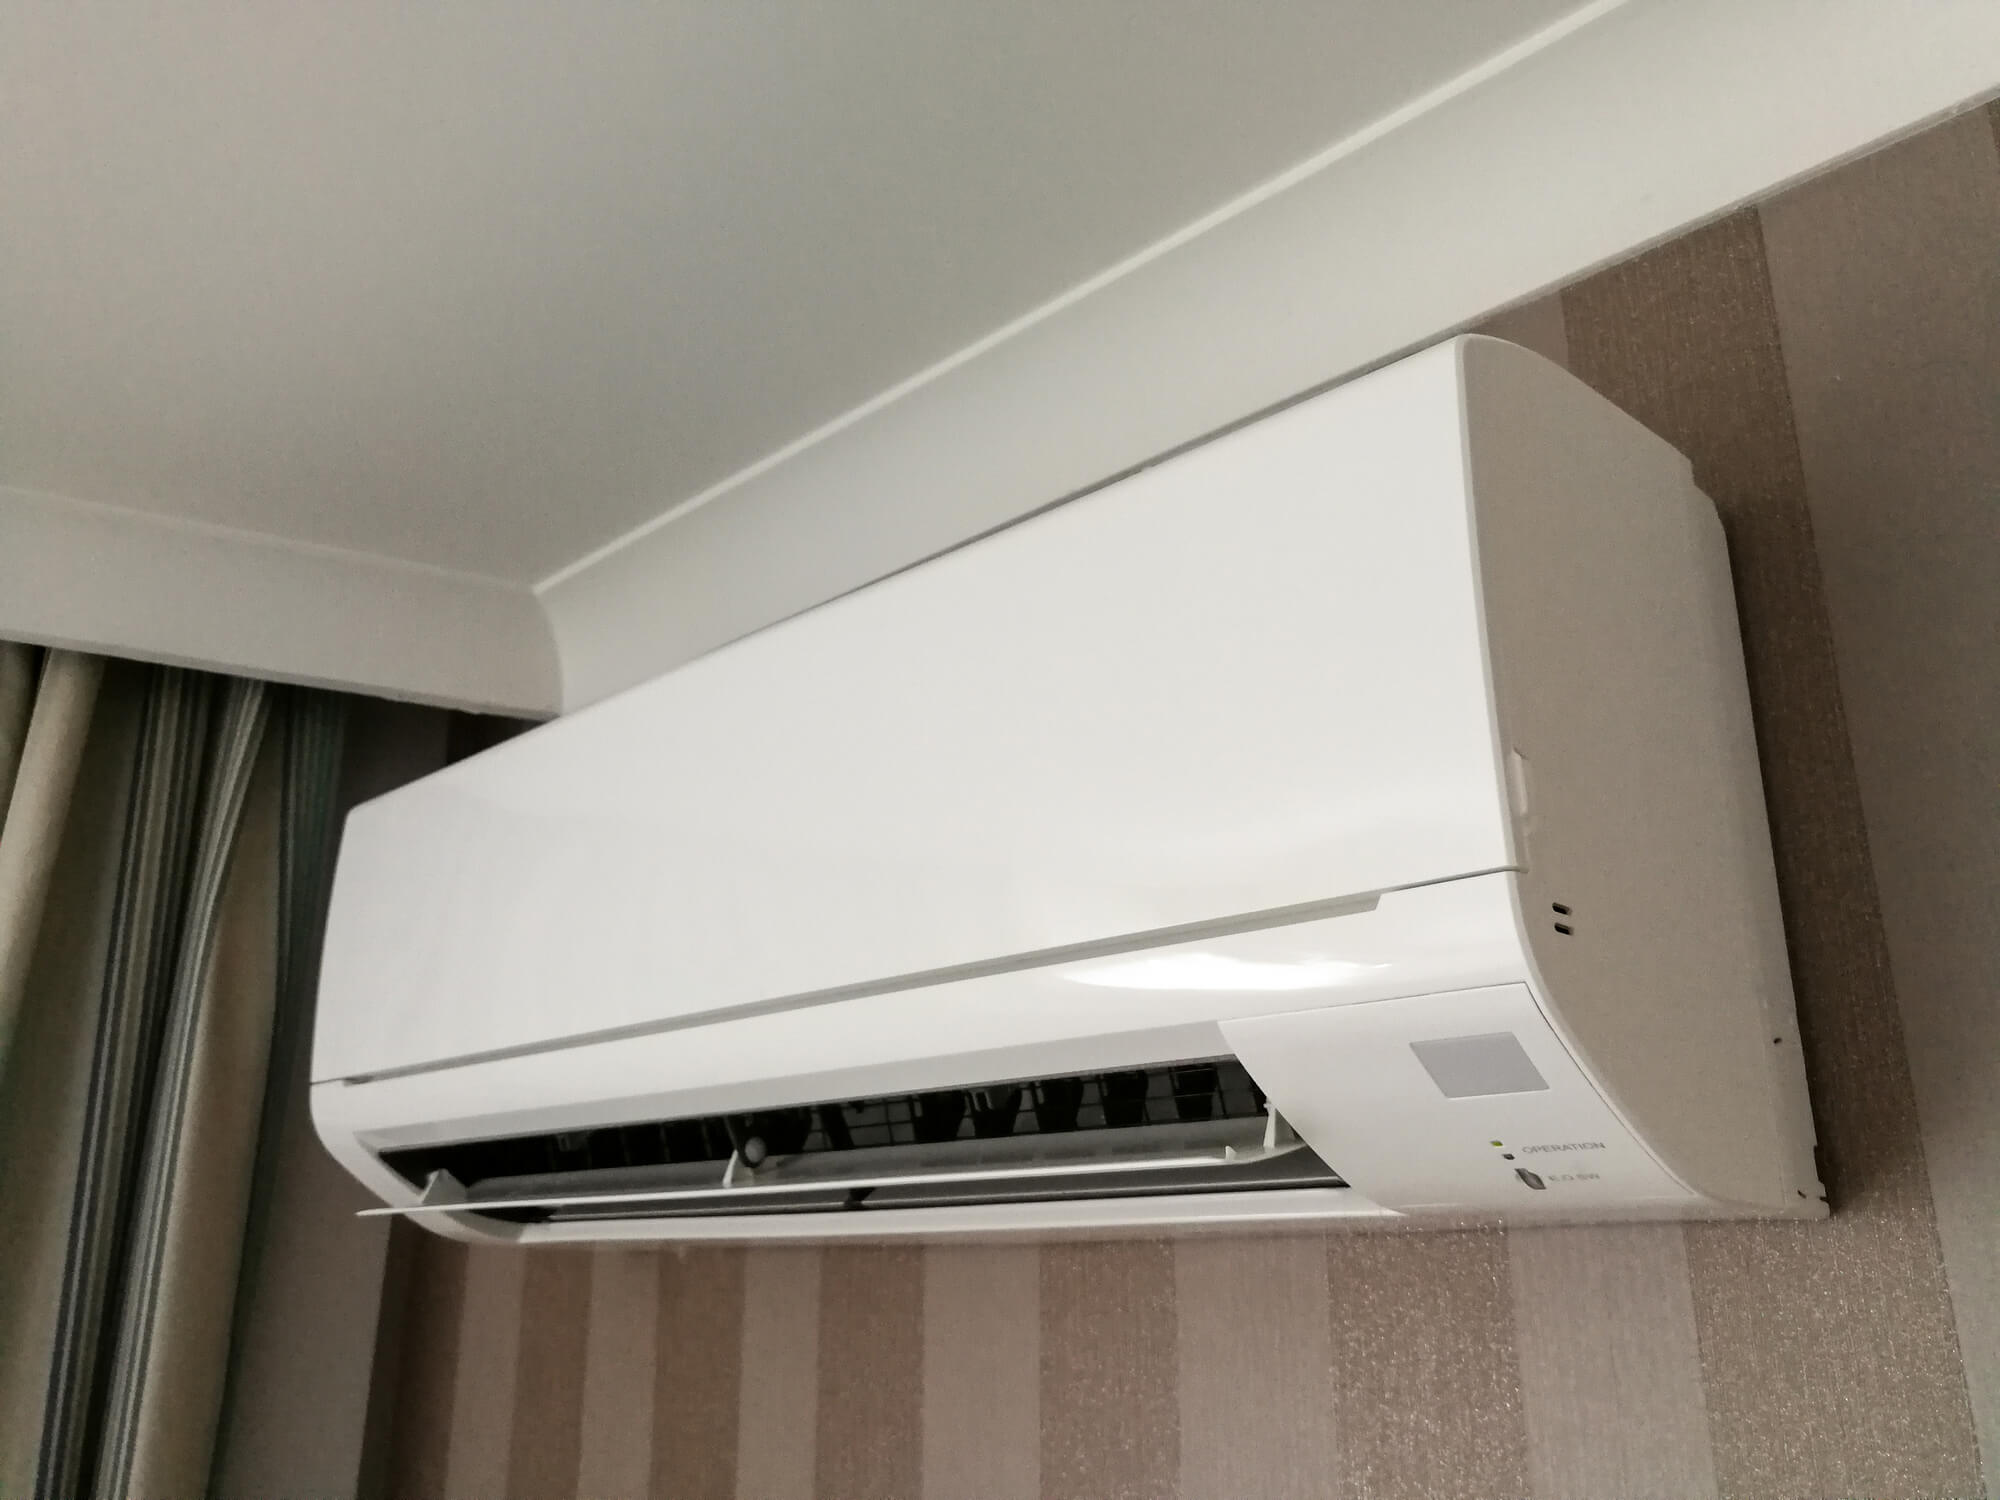 Air conditioning unit inside a house